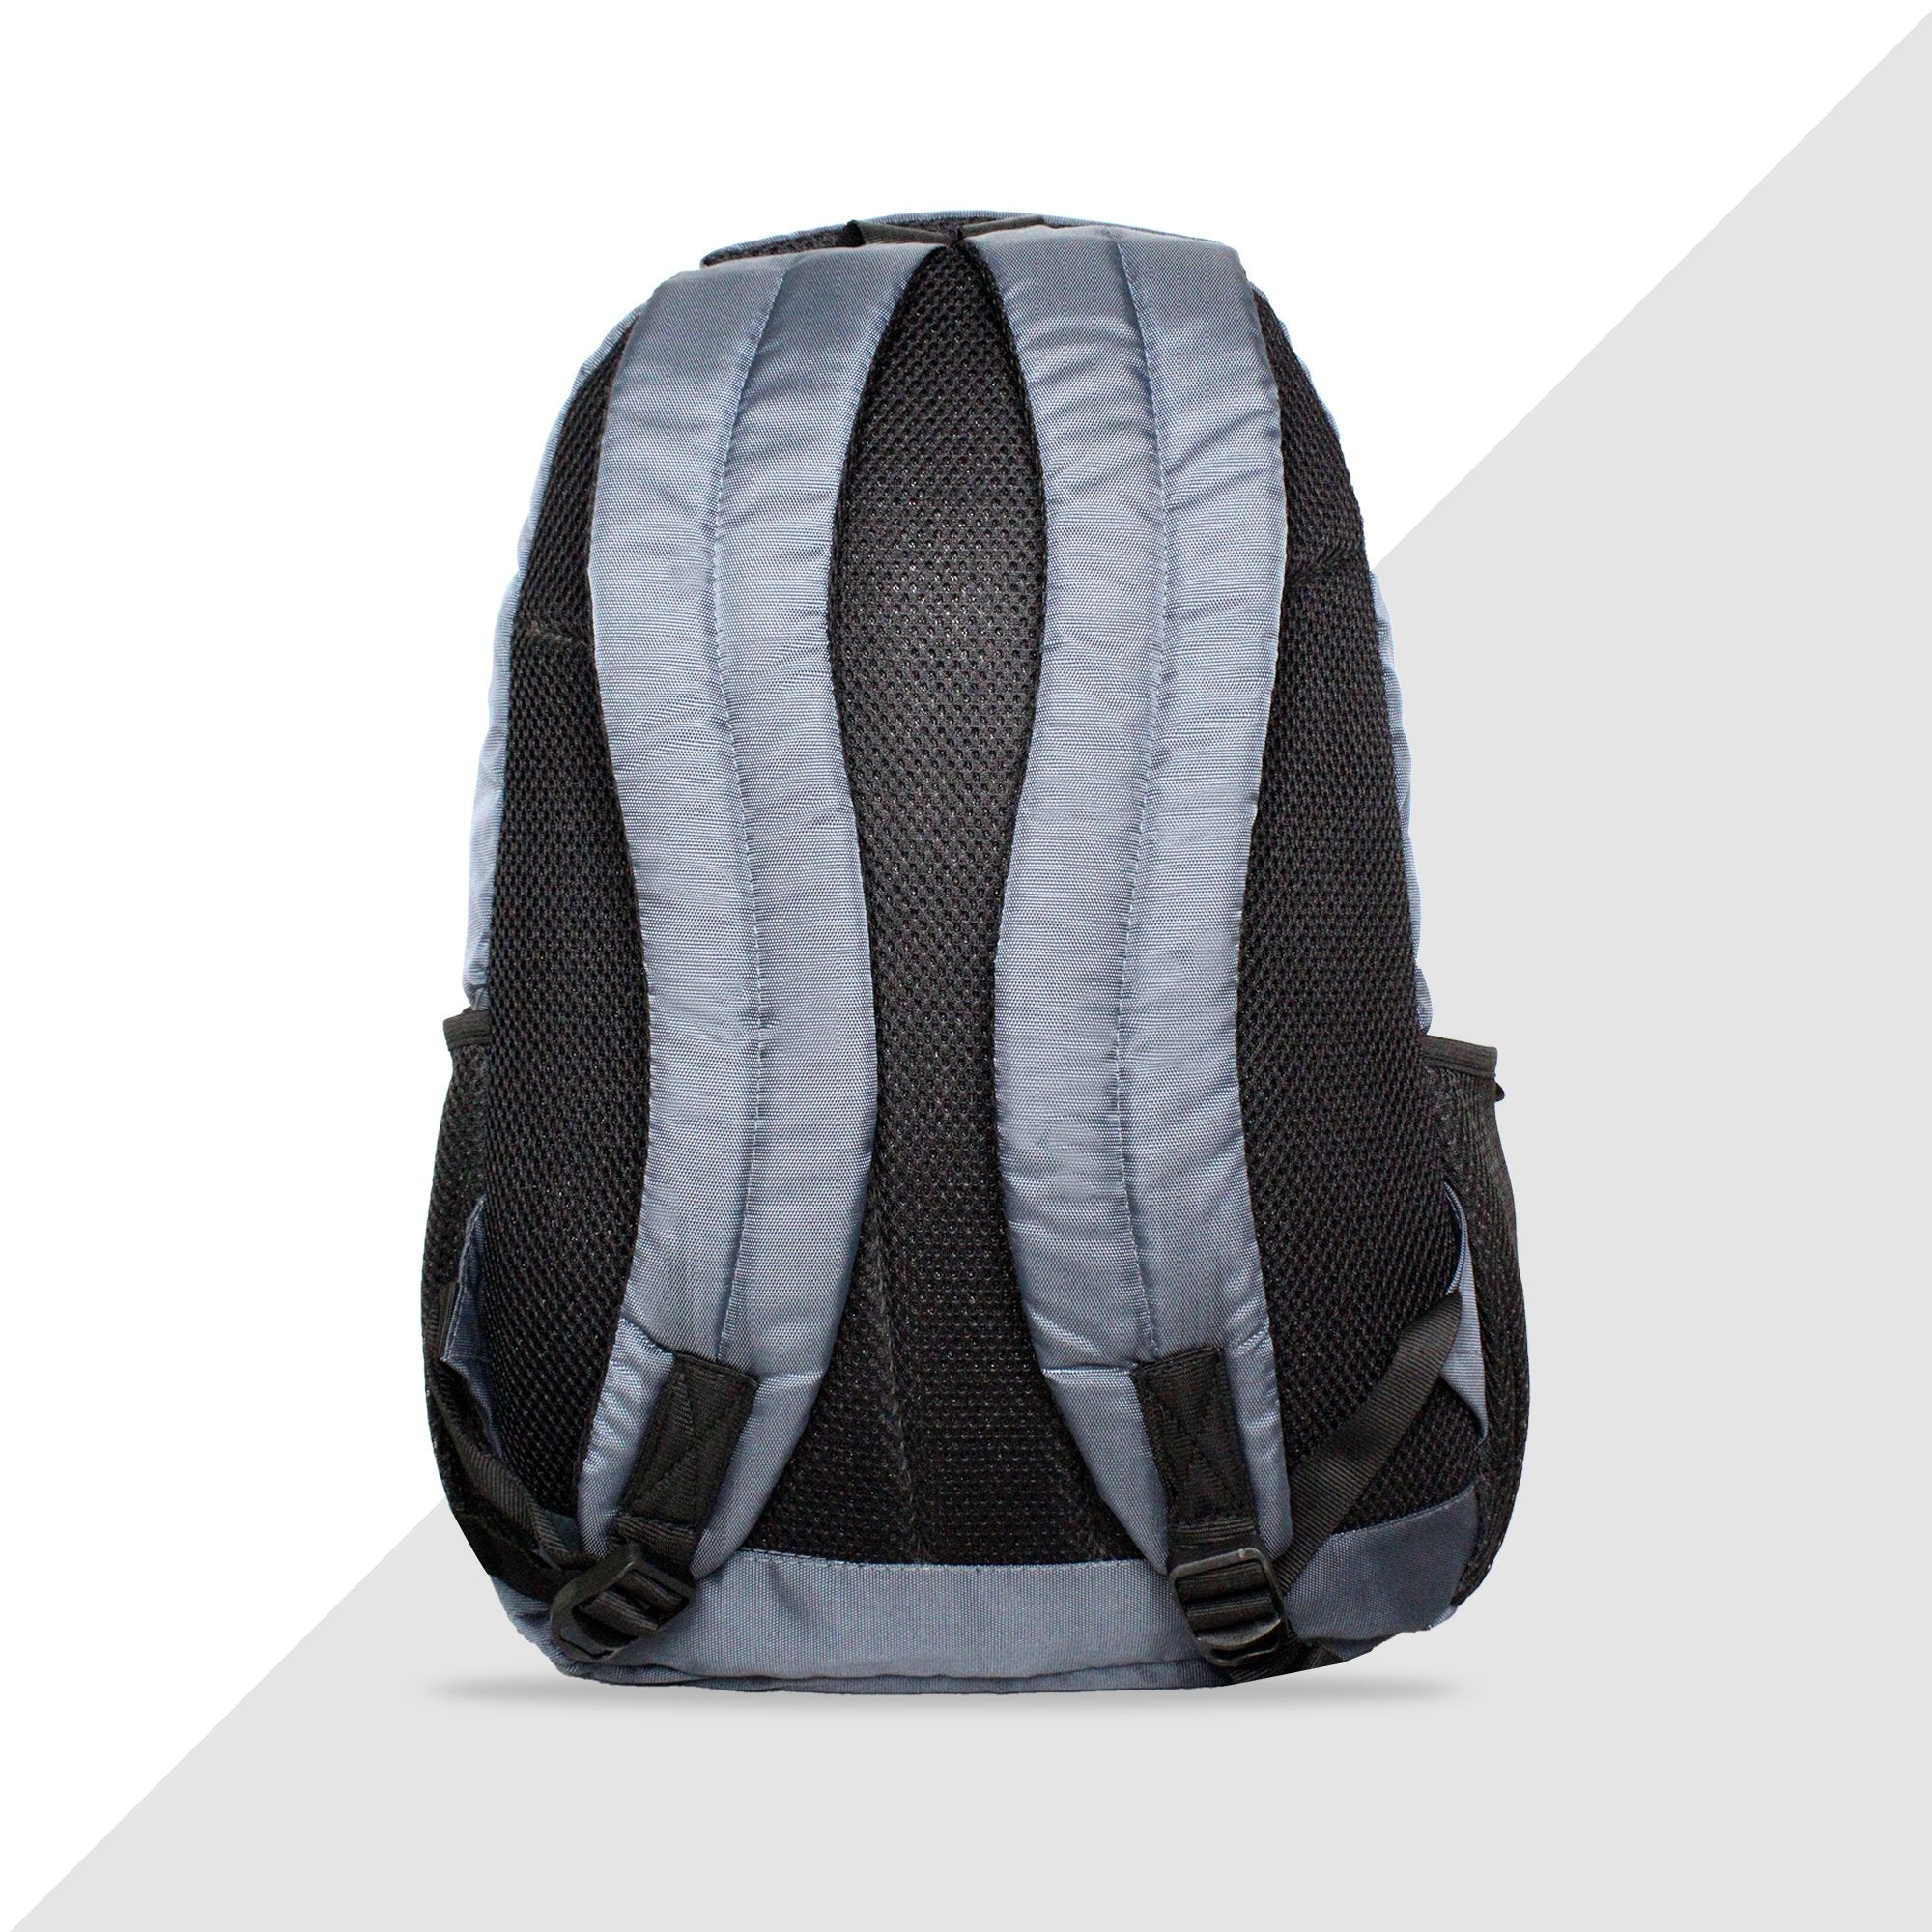 Lexus 40Ltr Laptop Backpack Upto 15.6 Inches - Grey